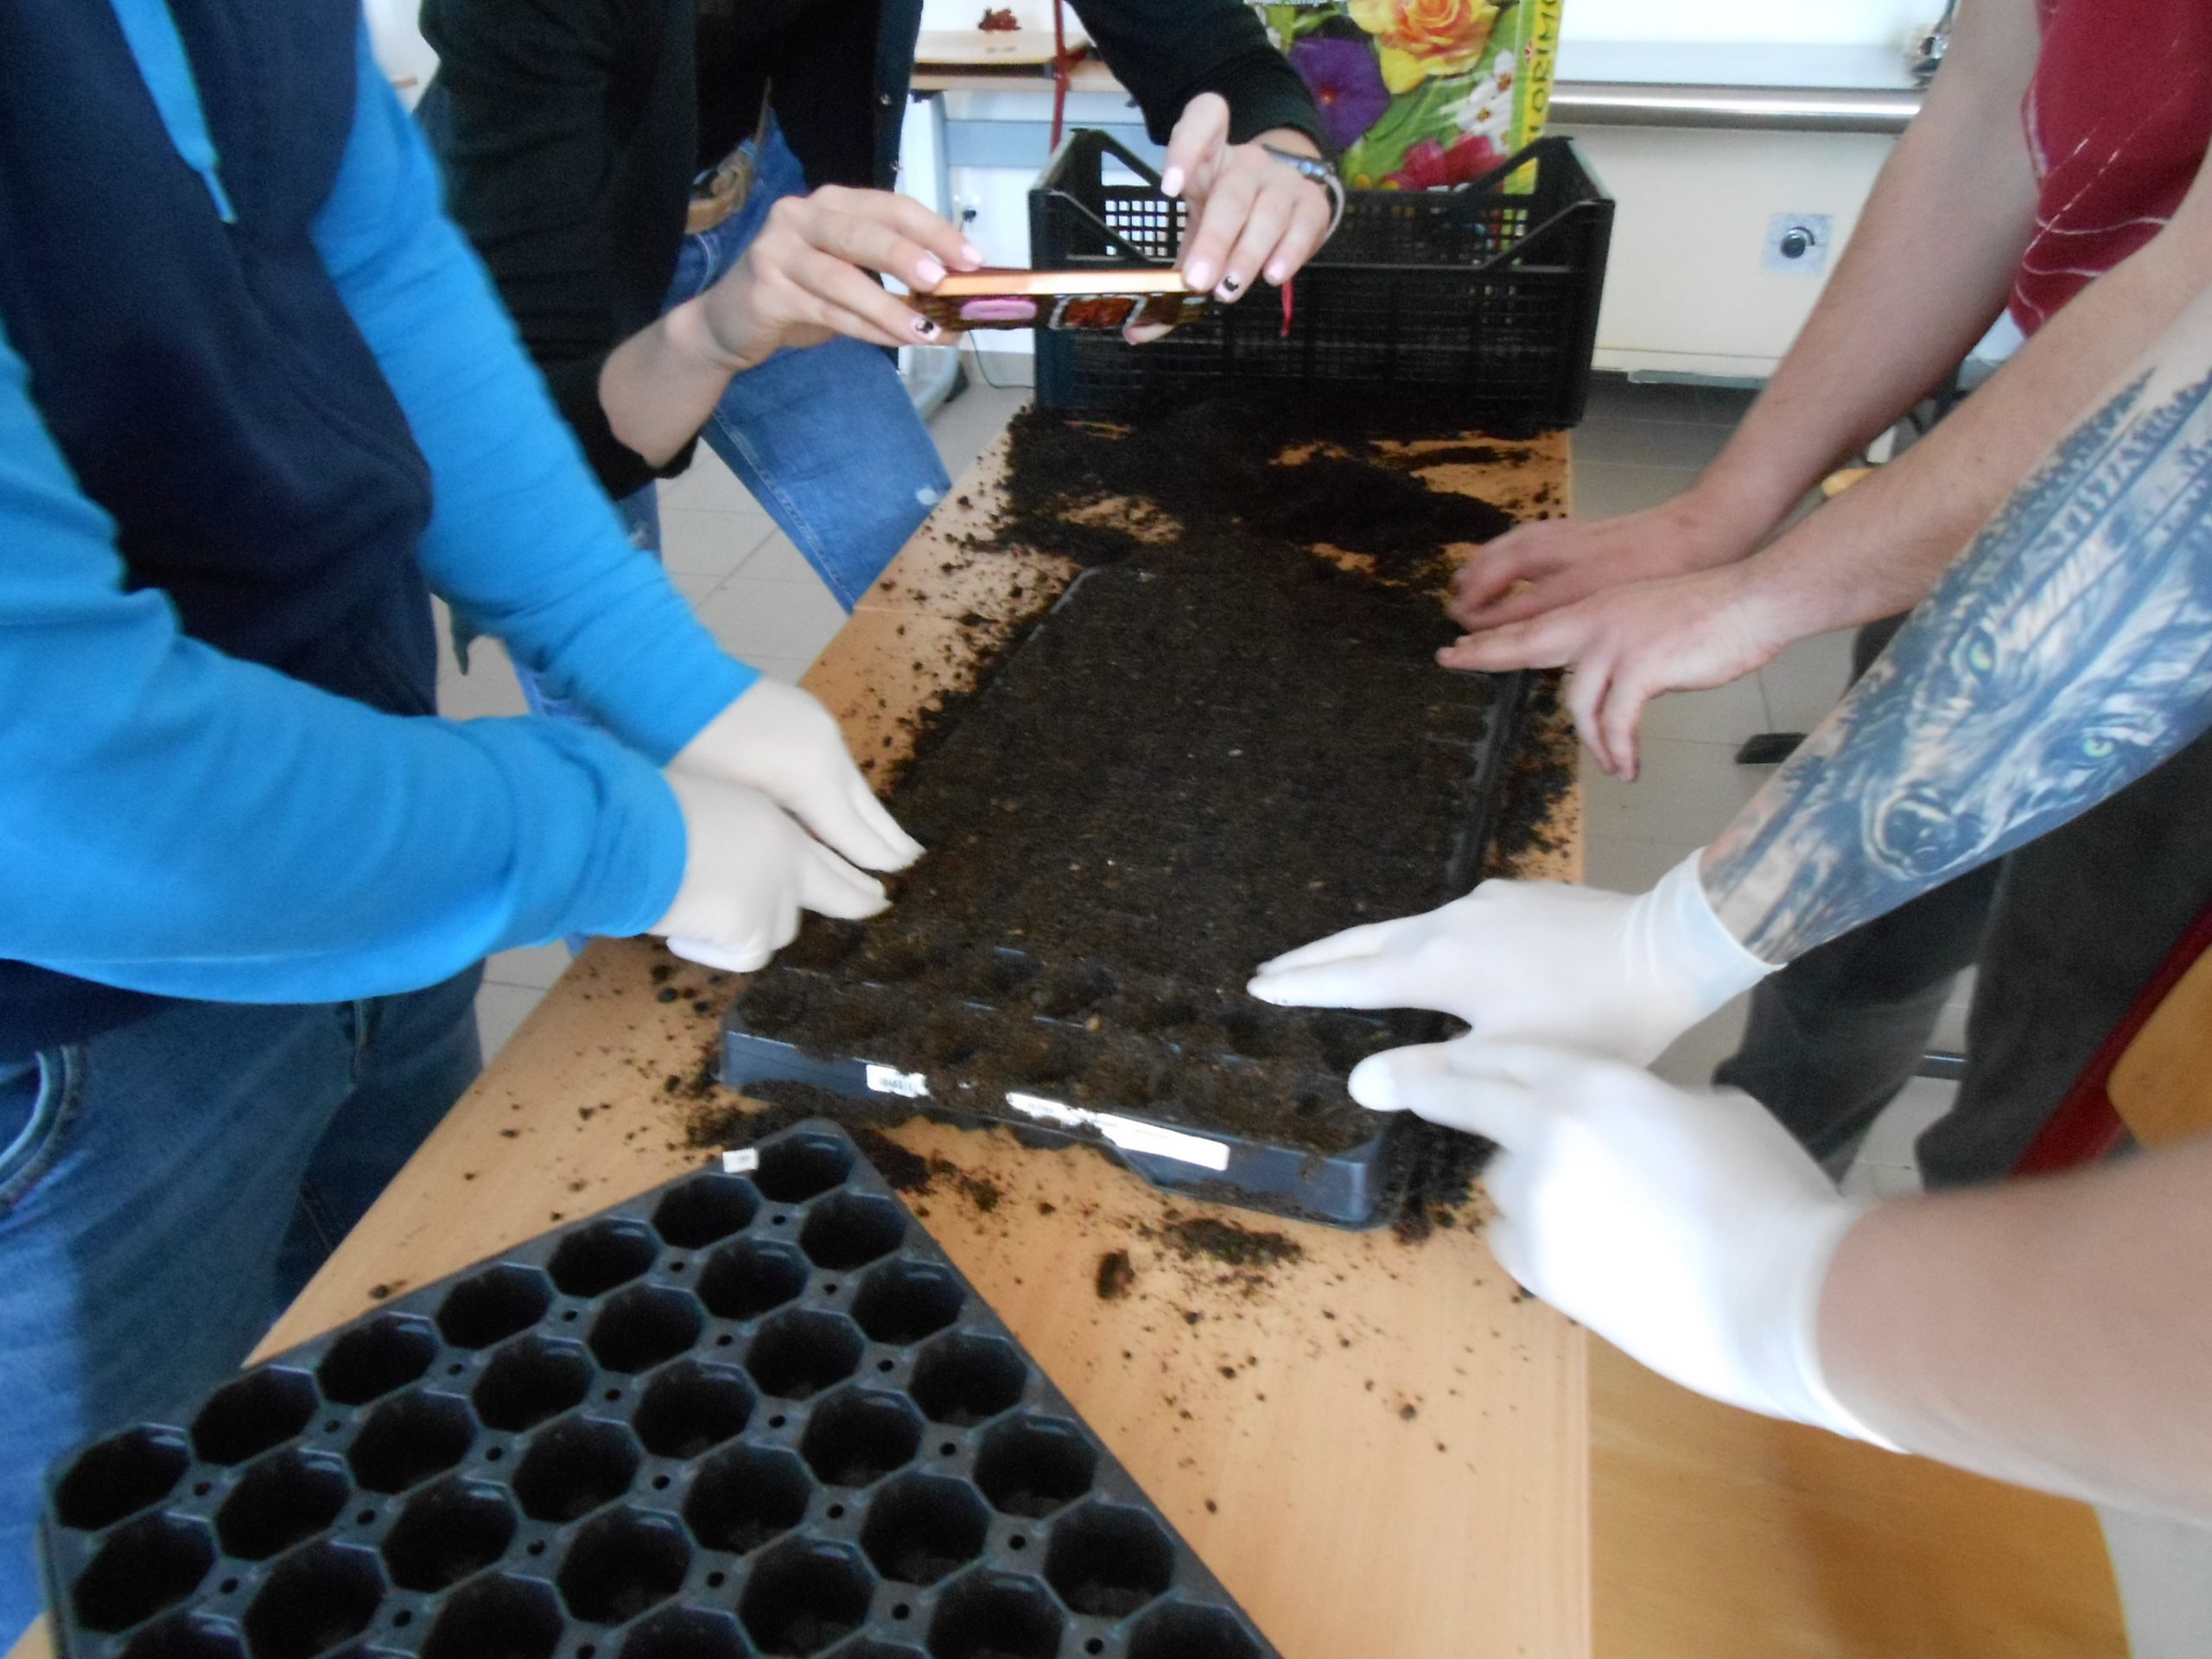 Students carrying out the experiment in the Galamb József Agricultural Secondary School in Makó